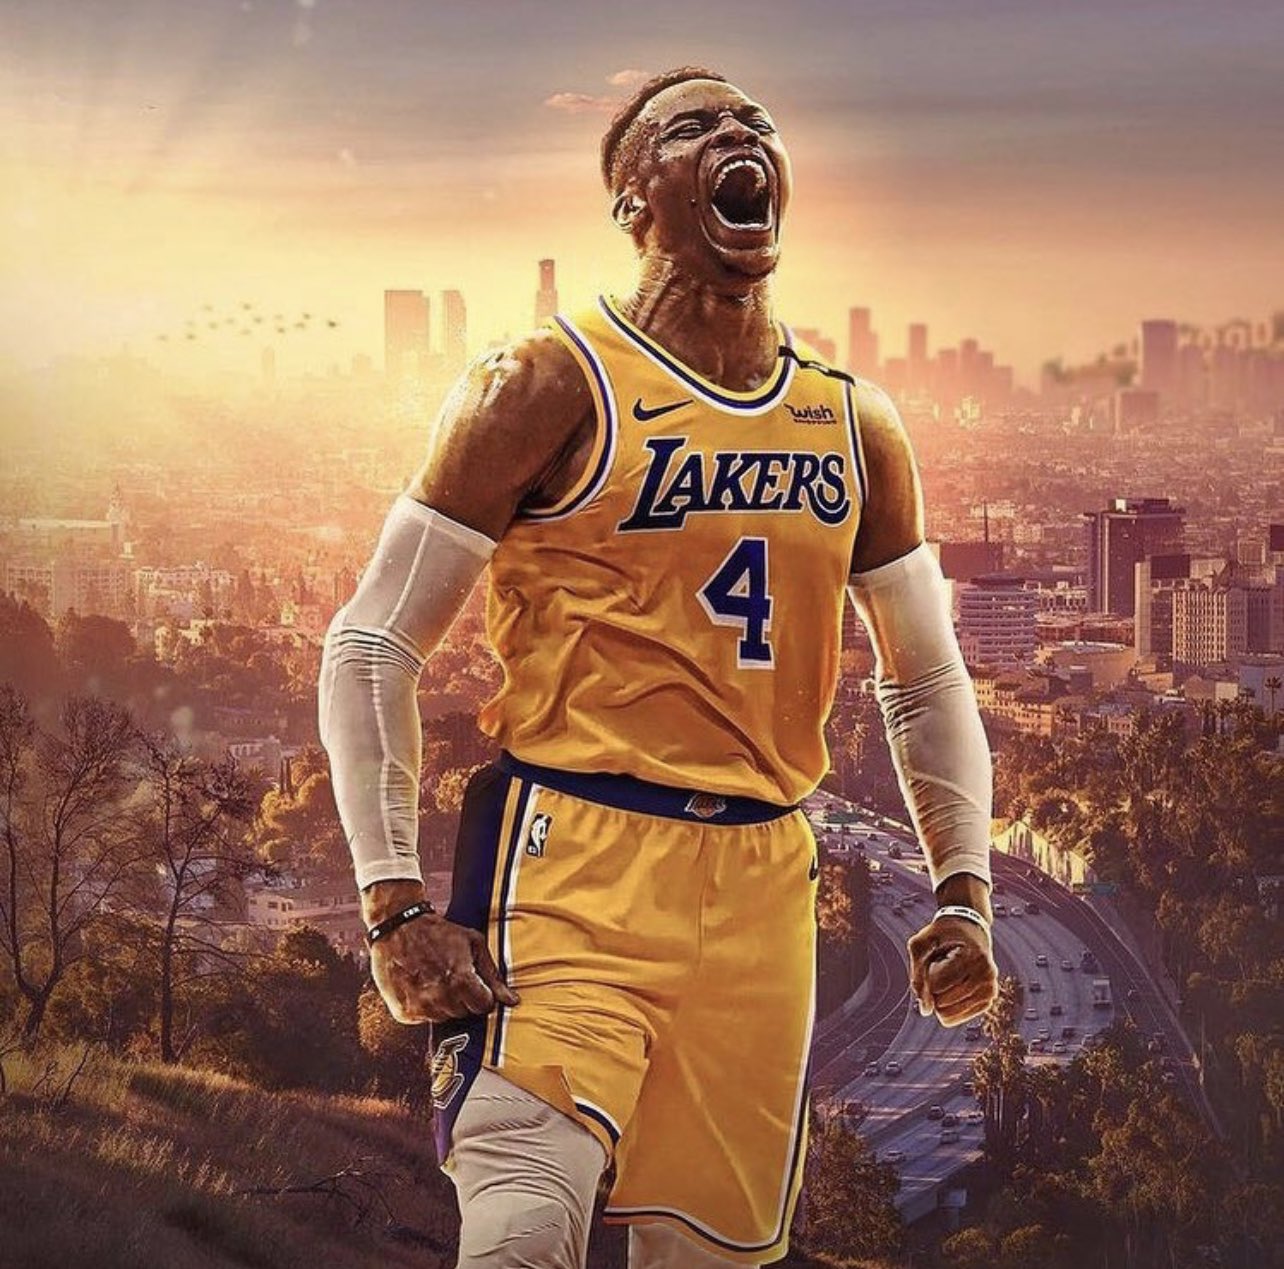 Lake Show'S OFFICIAL. RUSSELL WESTBROOK IS A LOS ANGELES LAKER!!!